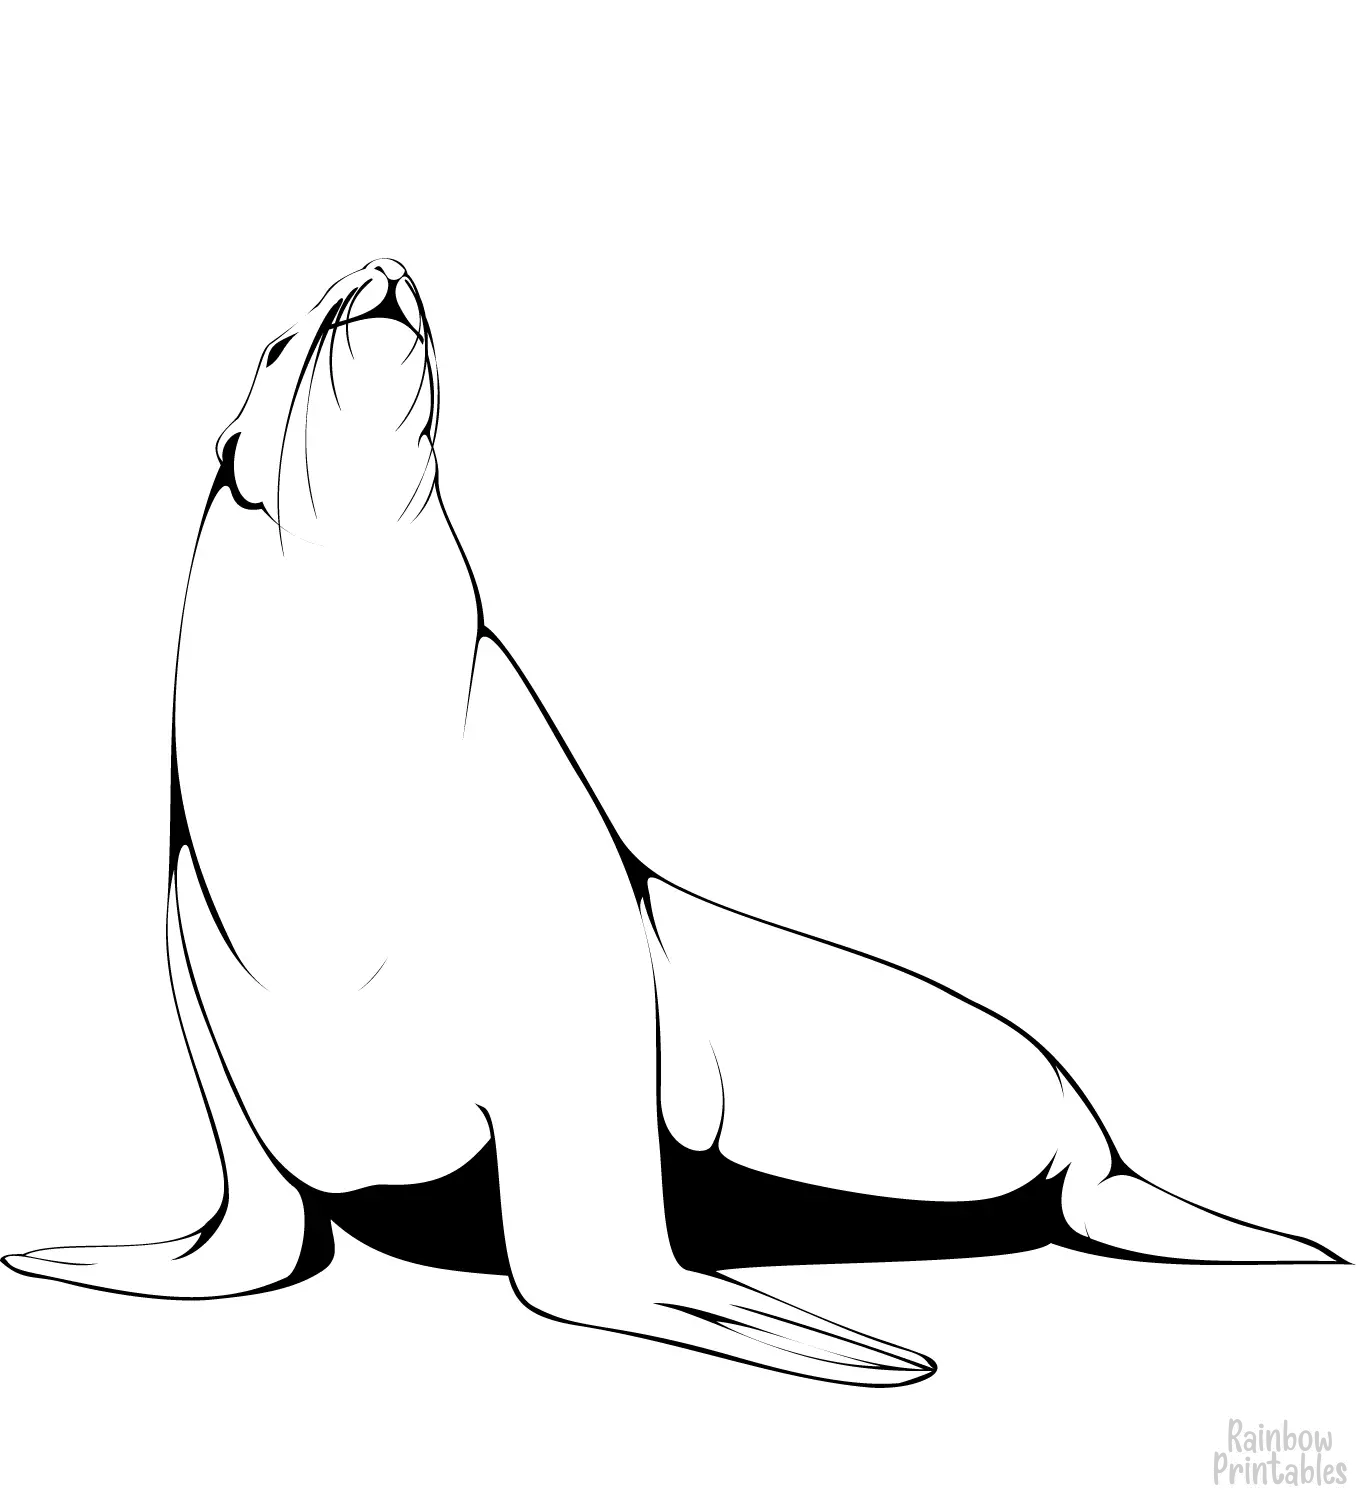 SIMPLE-EASY-line-drawings-SEAL-coloring-page-for-kids